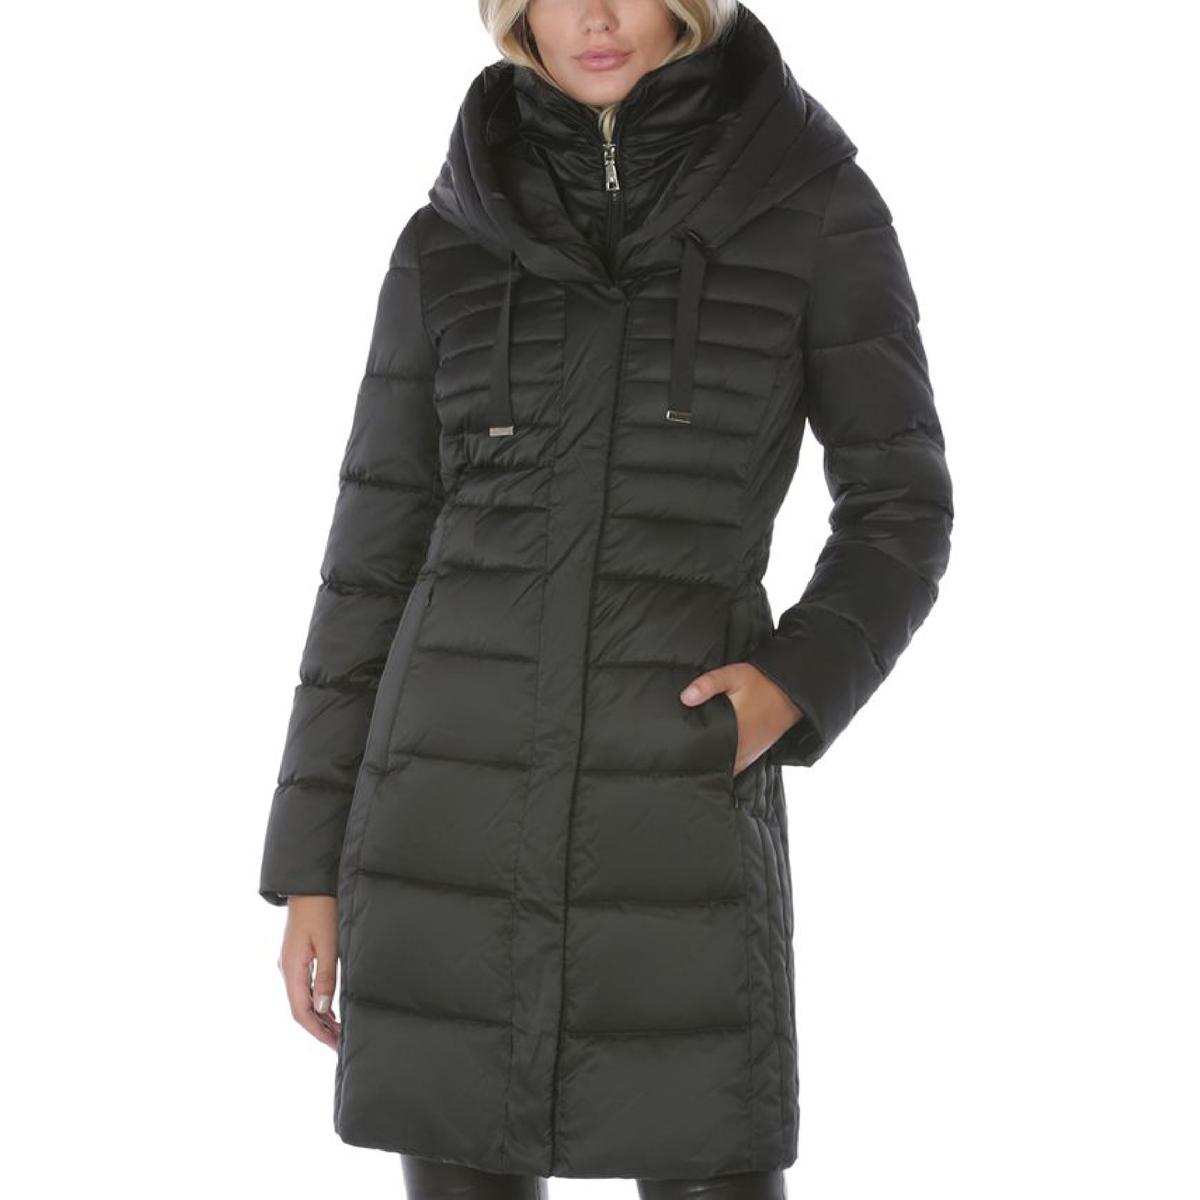 Tahari Mia Women's Petite Size Quilted Down Insulated Puffer Coat with ...